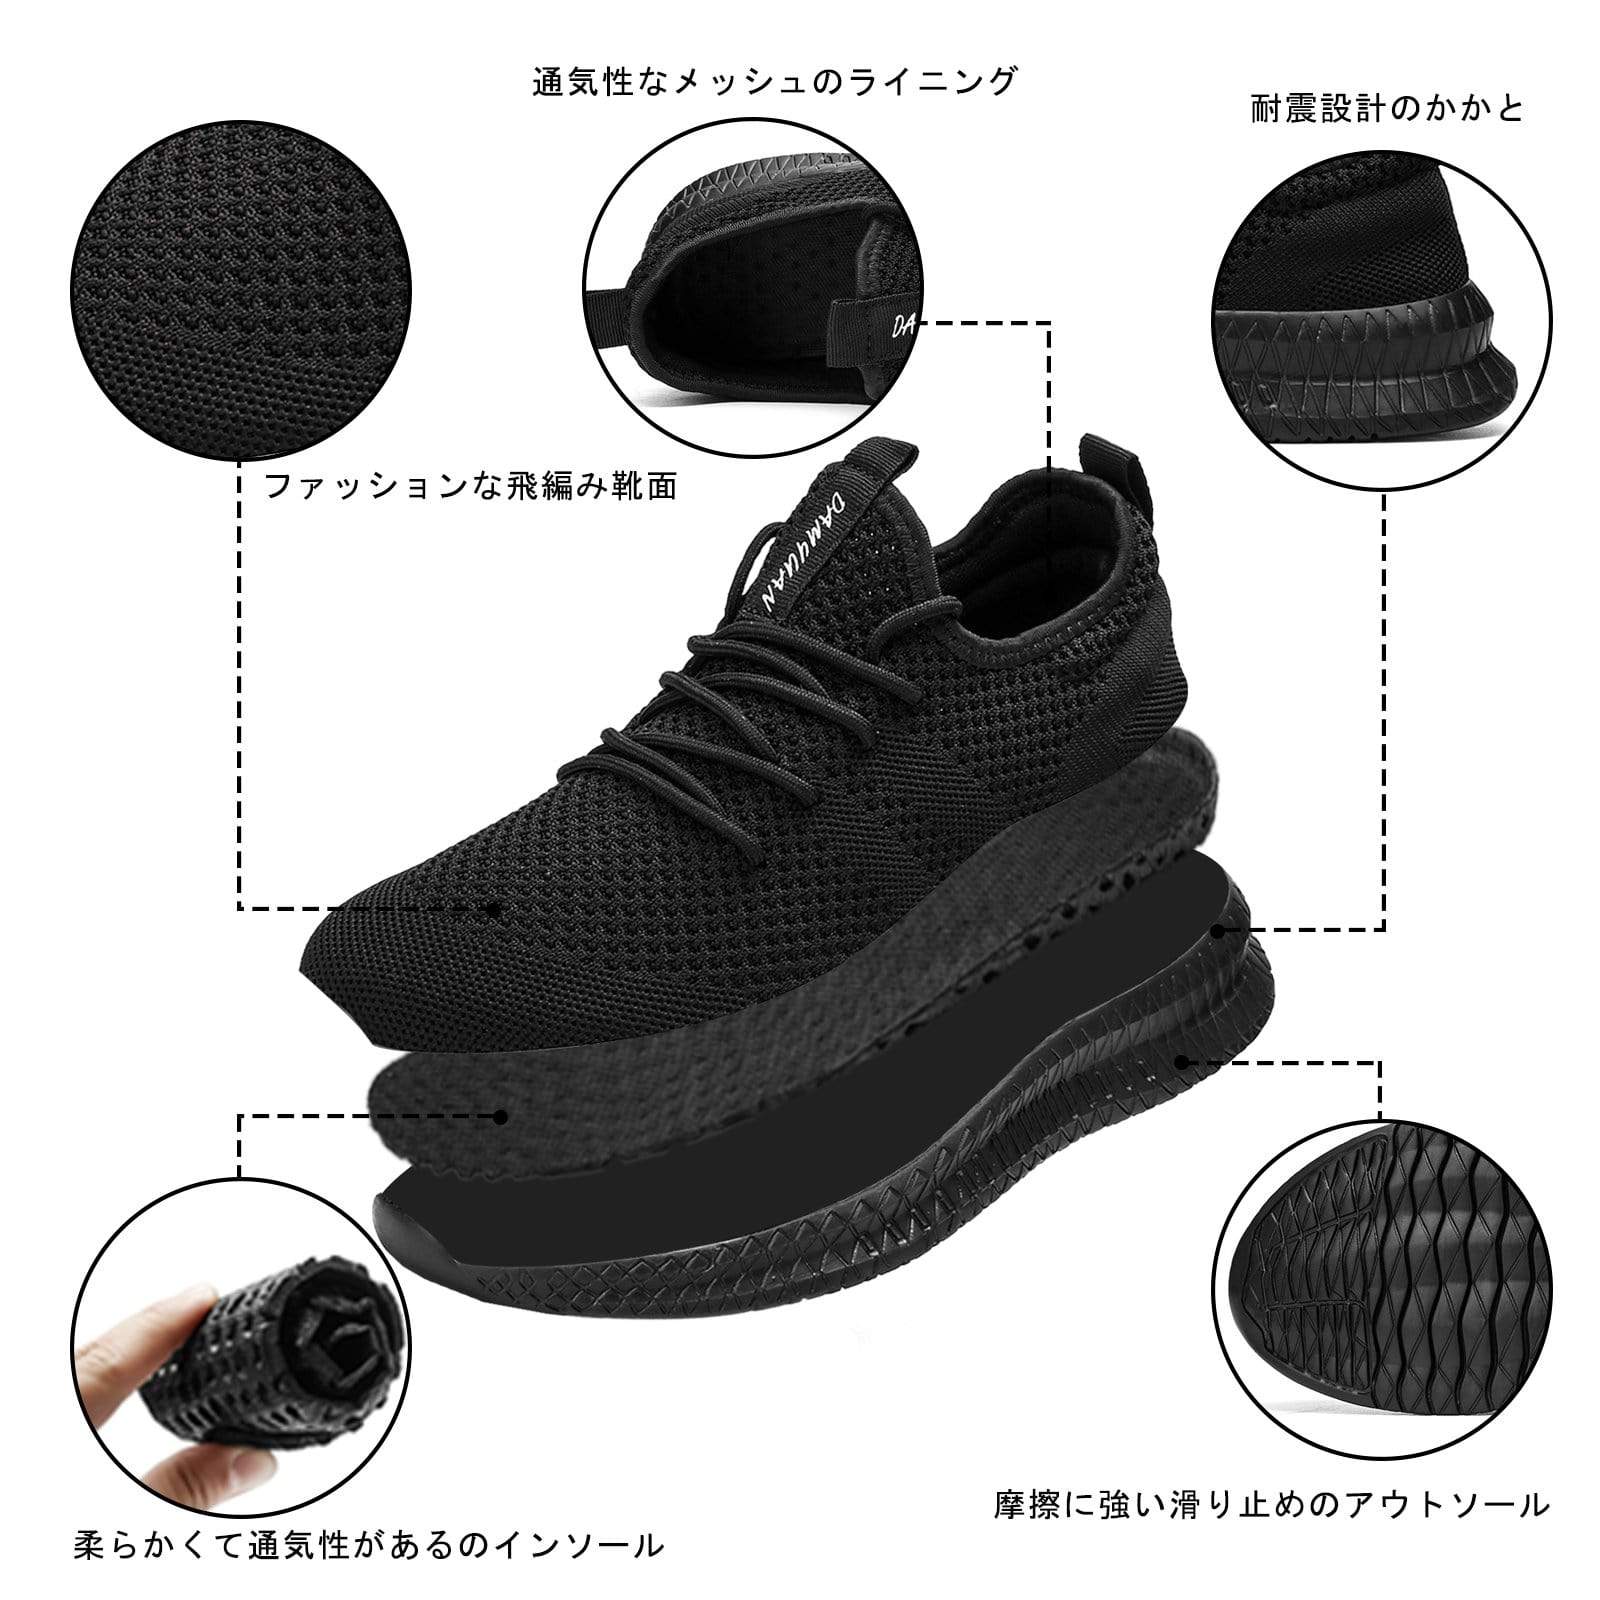 Damyuan Casual Shoes Men Mesh Breathable Comfortable Lace-up Sports Shoes Outdoor Red Tennis Sneakers